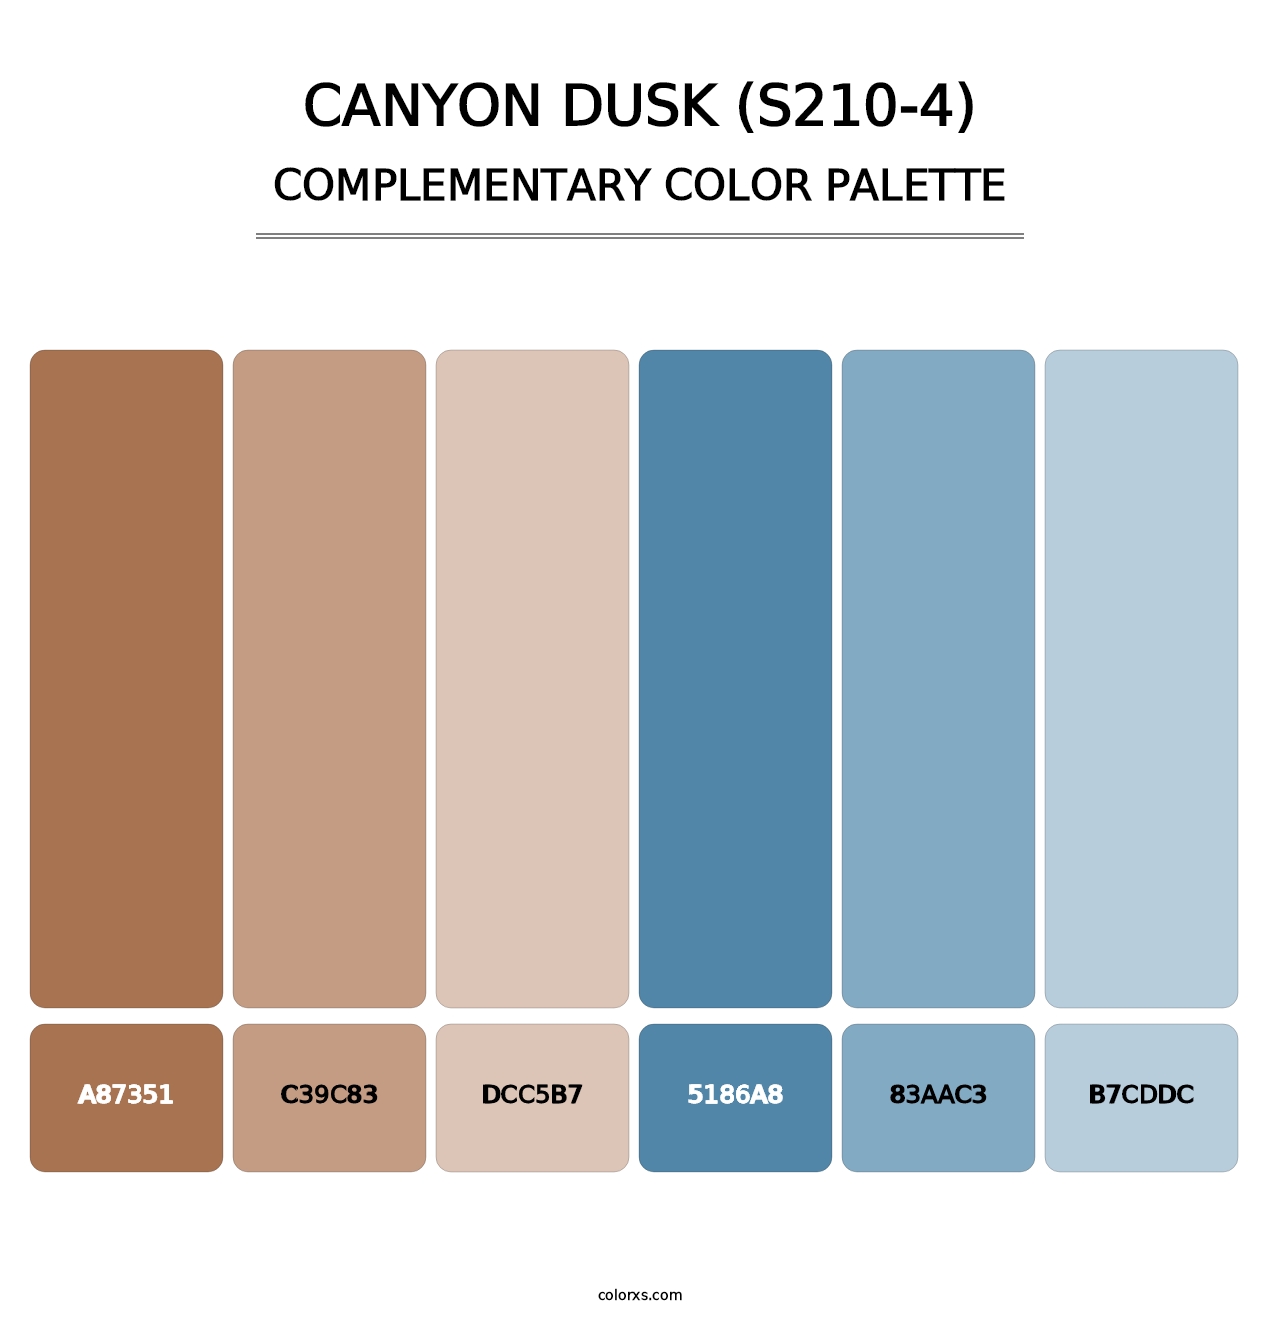 Canyon Dusk (S210-4) - Complementary Color Palette